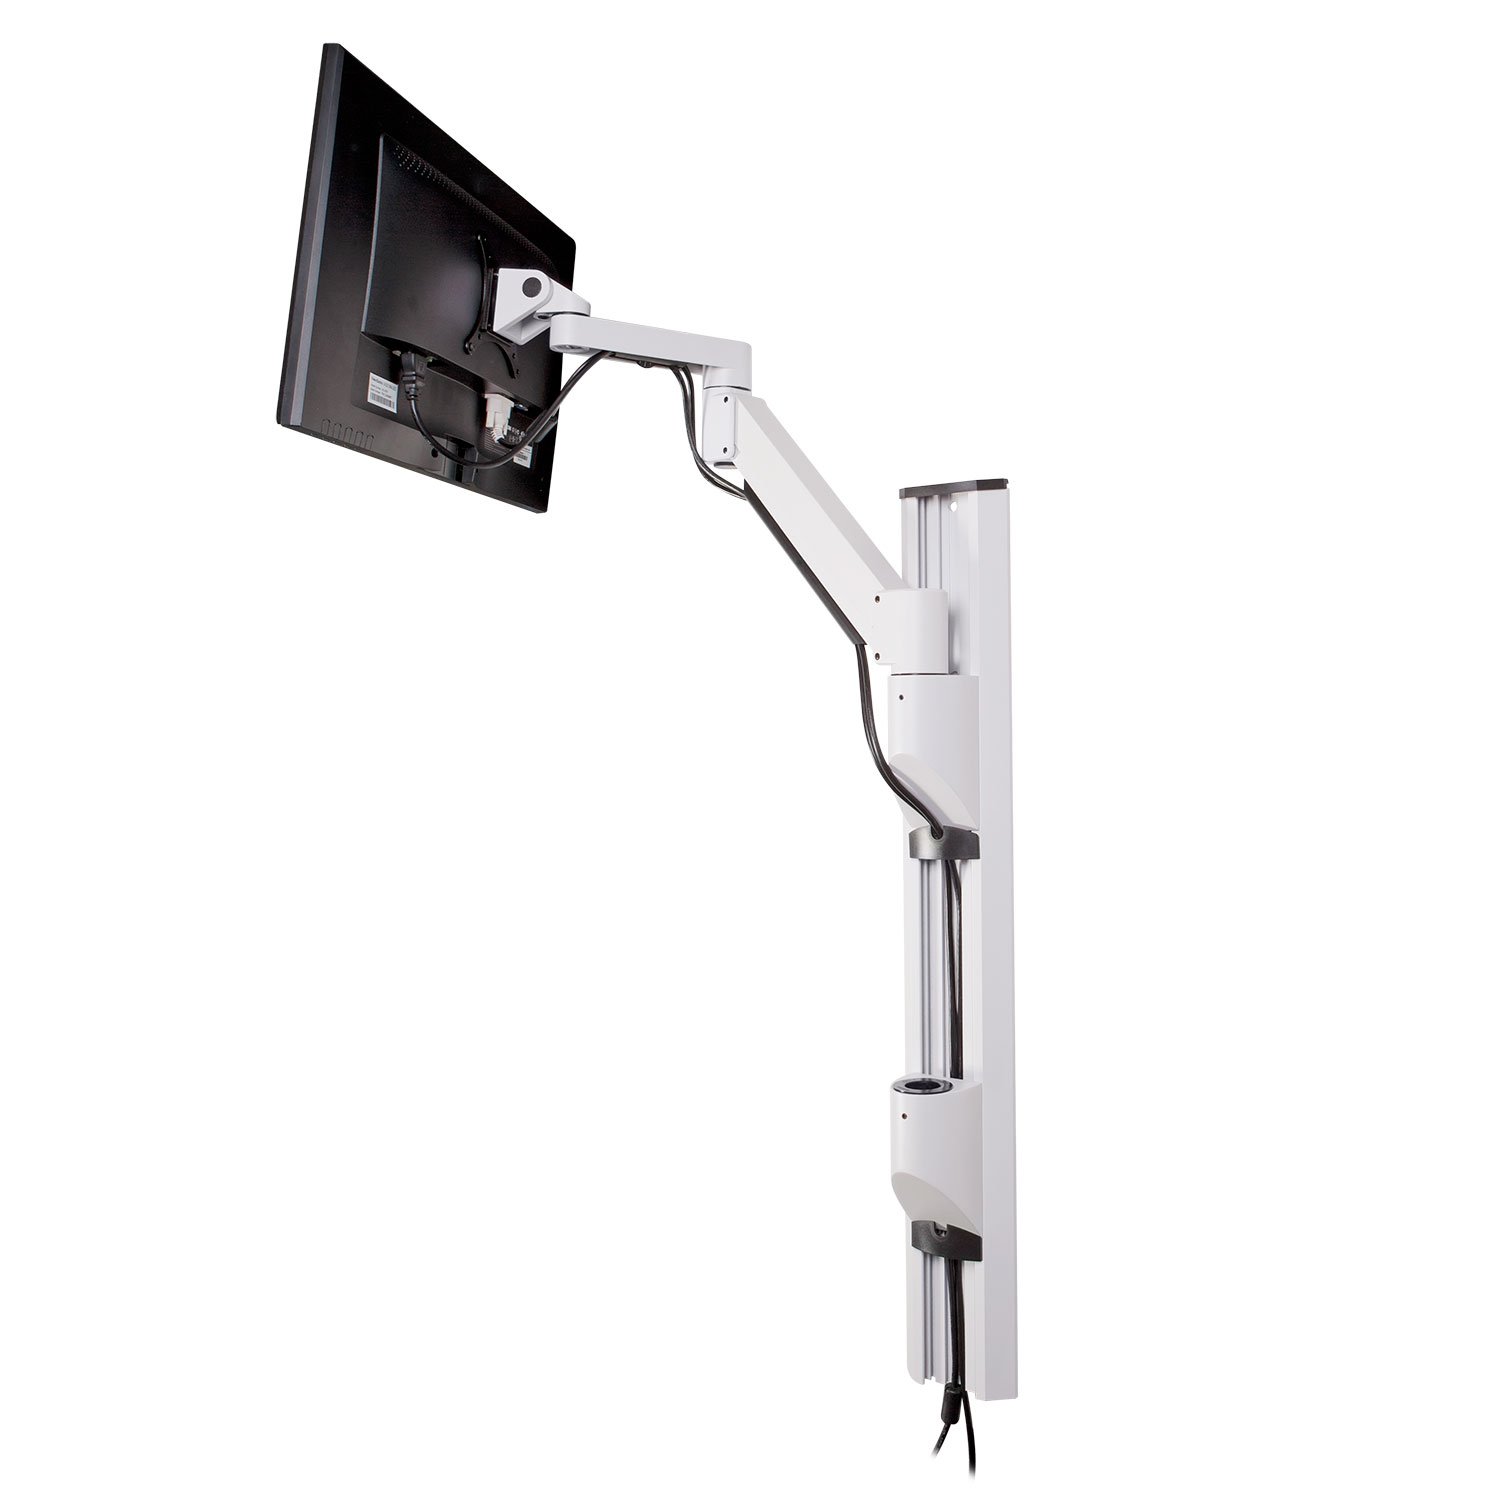 https://www.ergodirect.com/images/Innovative_LCD_Arms/16167/alternative/Innovative-8326-13-Vertical-Wall-Mounting-Track-with-13-length_3.jpg